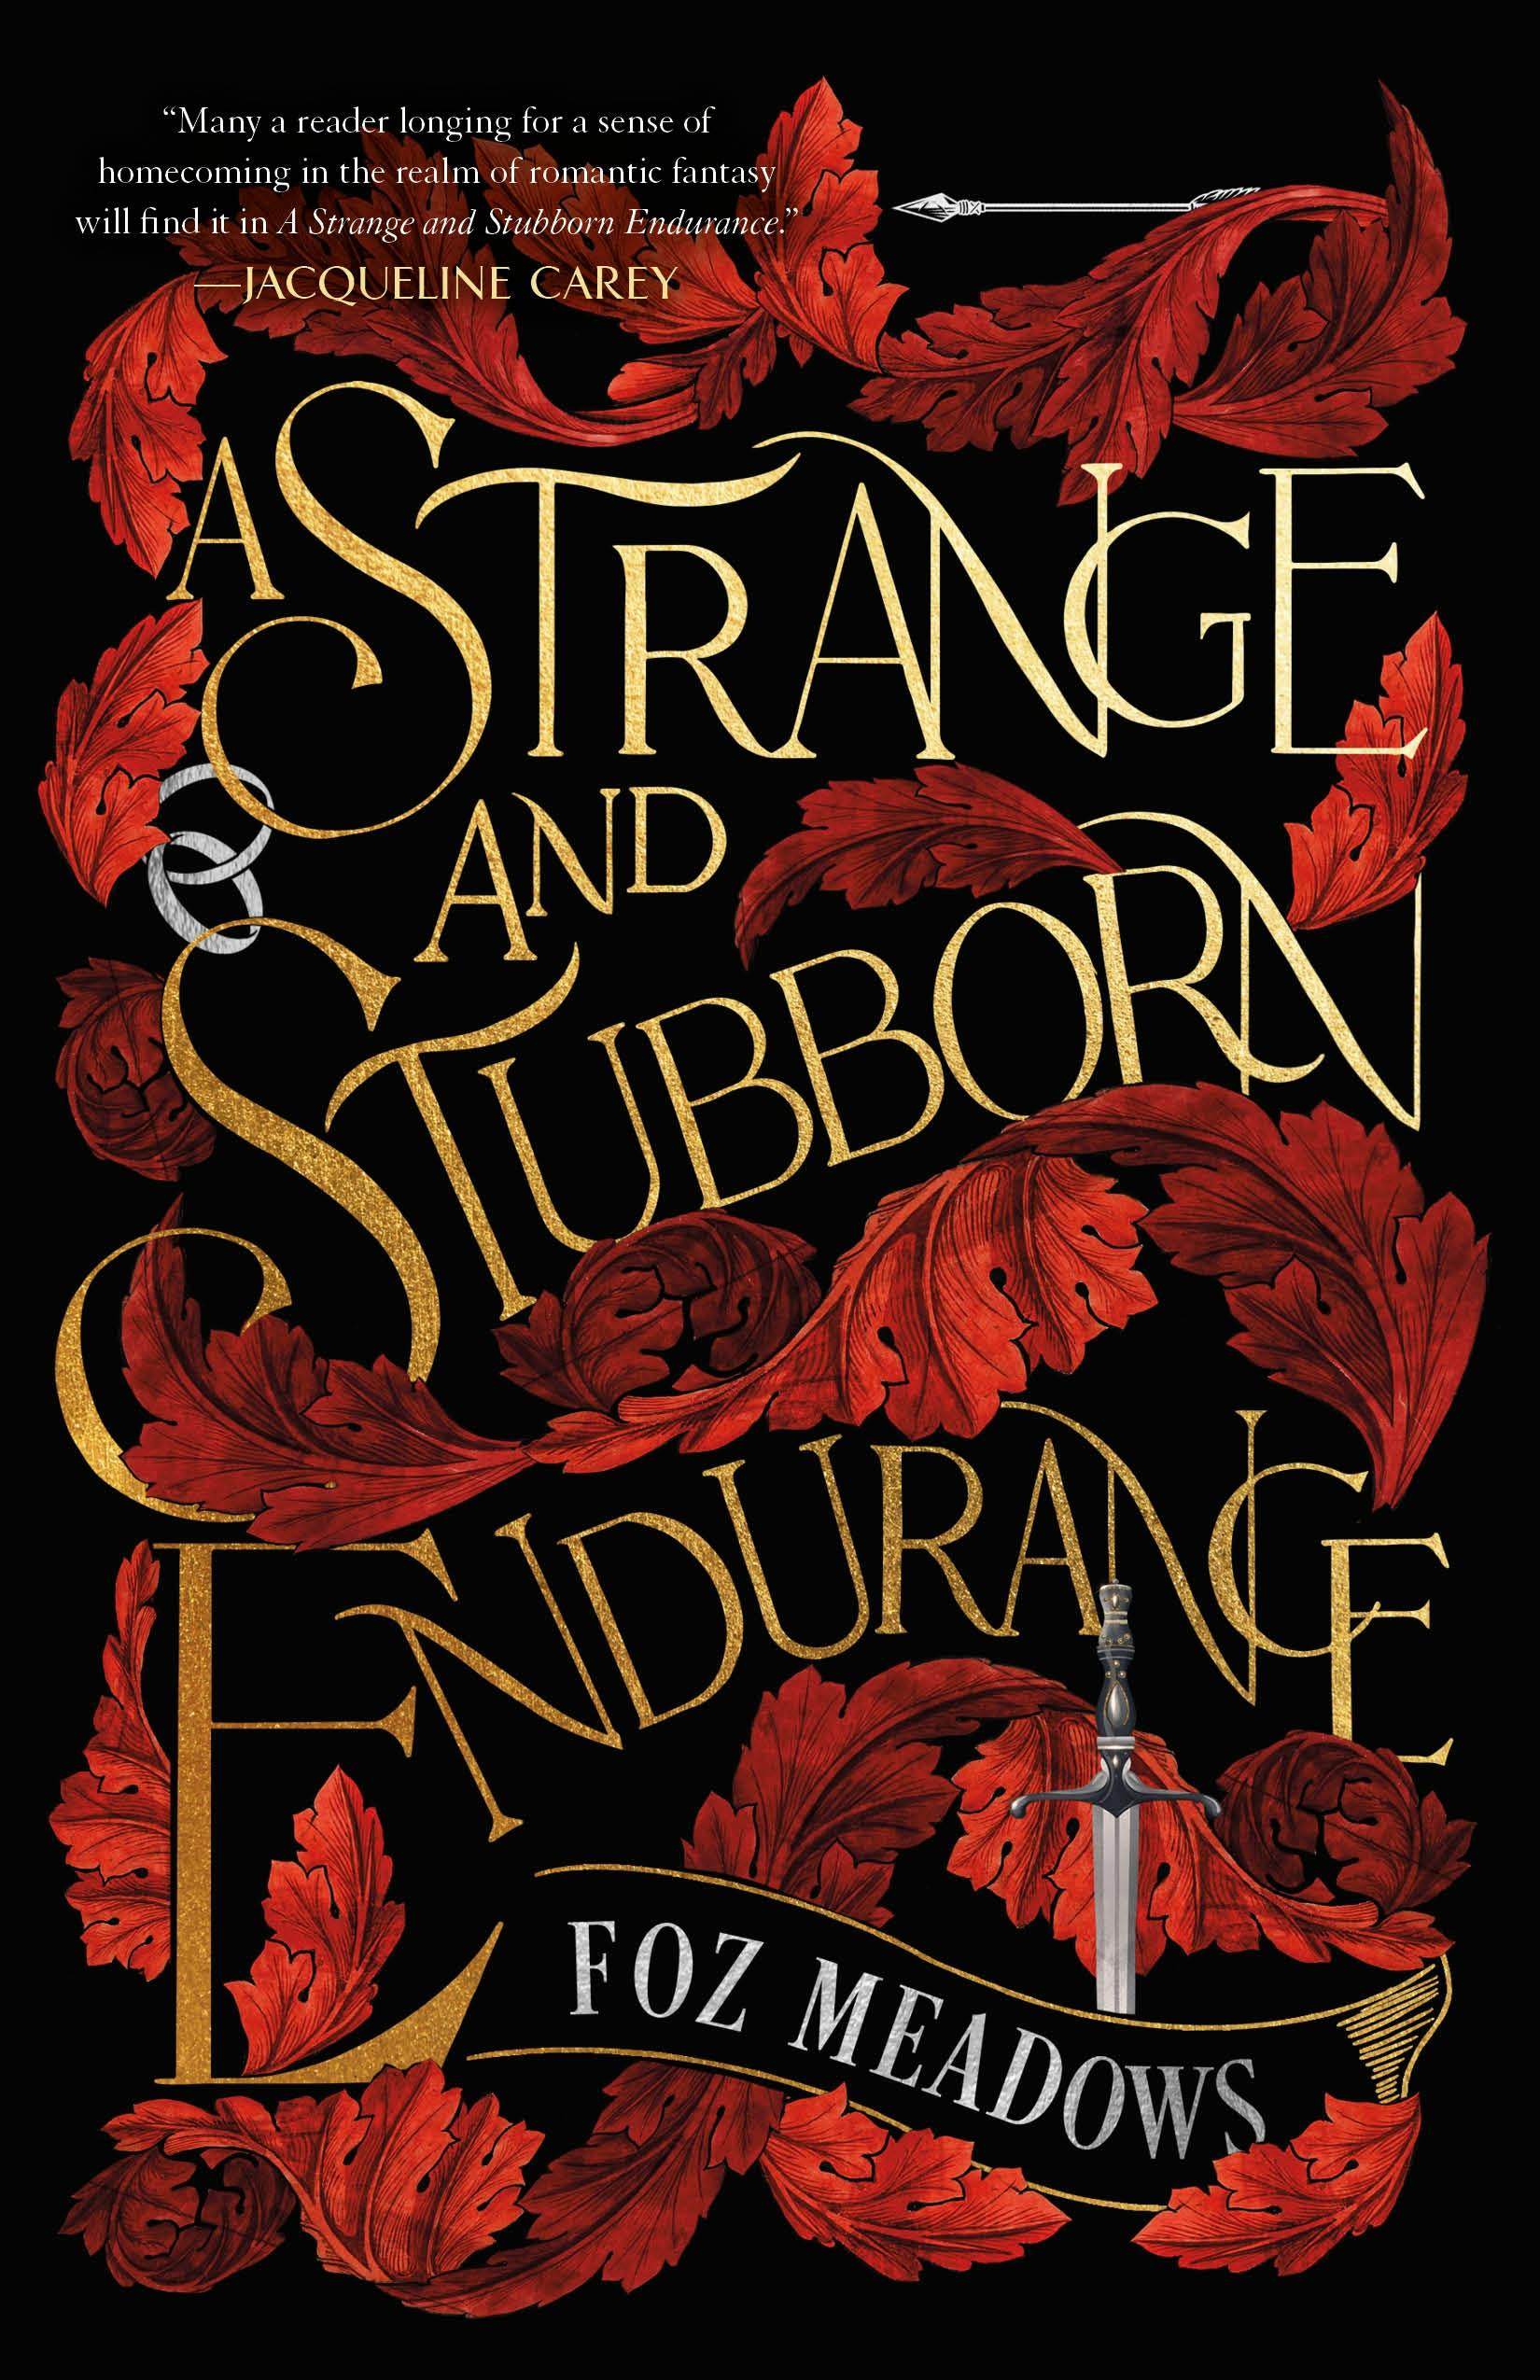 Cover for the book titled as: A Strange and Stubborn Endurance